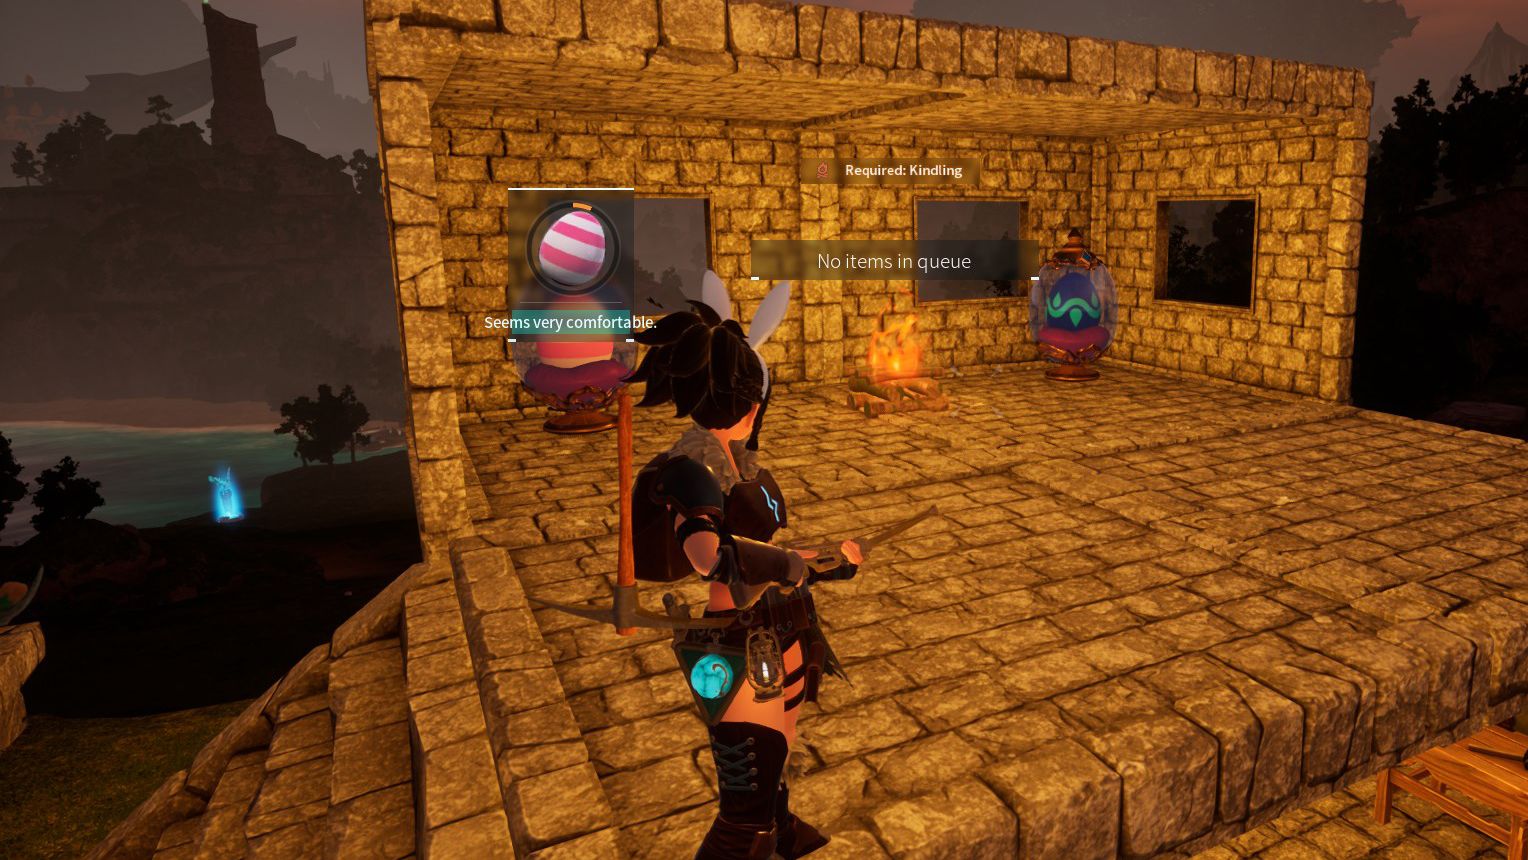 A Palworld player stands in front of two eggs hatching